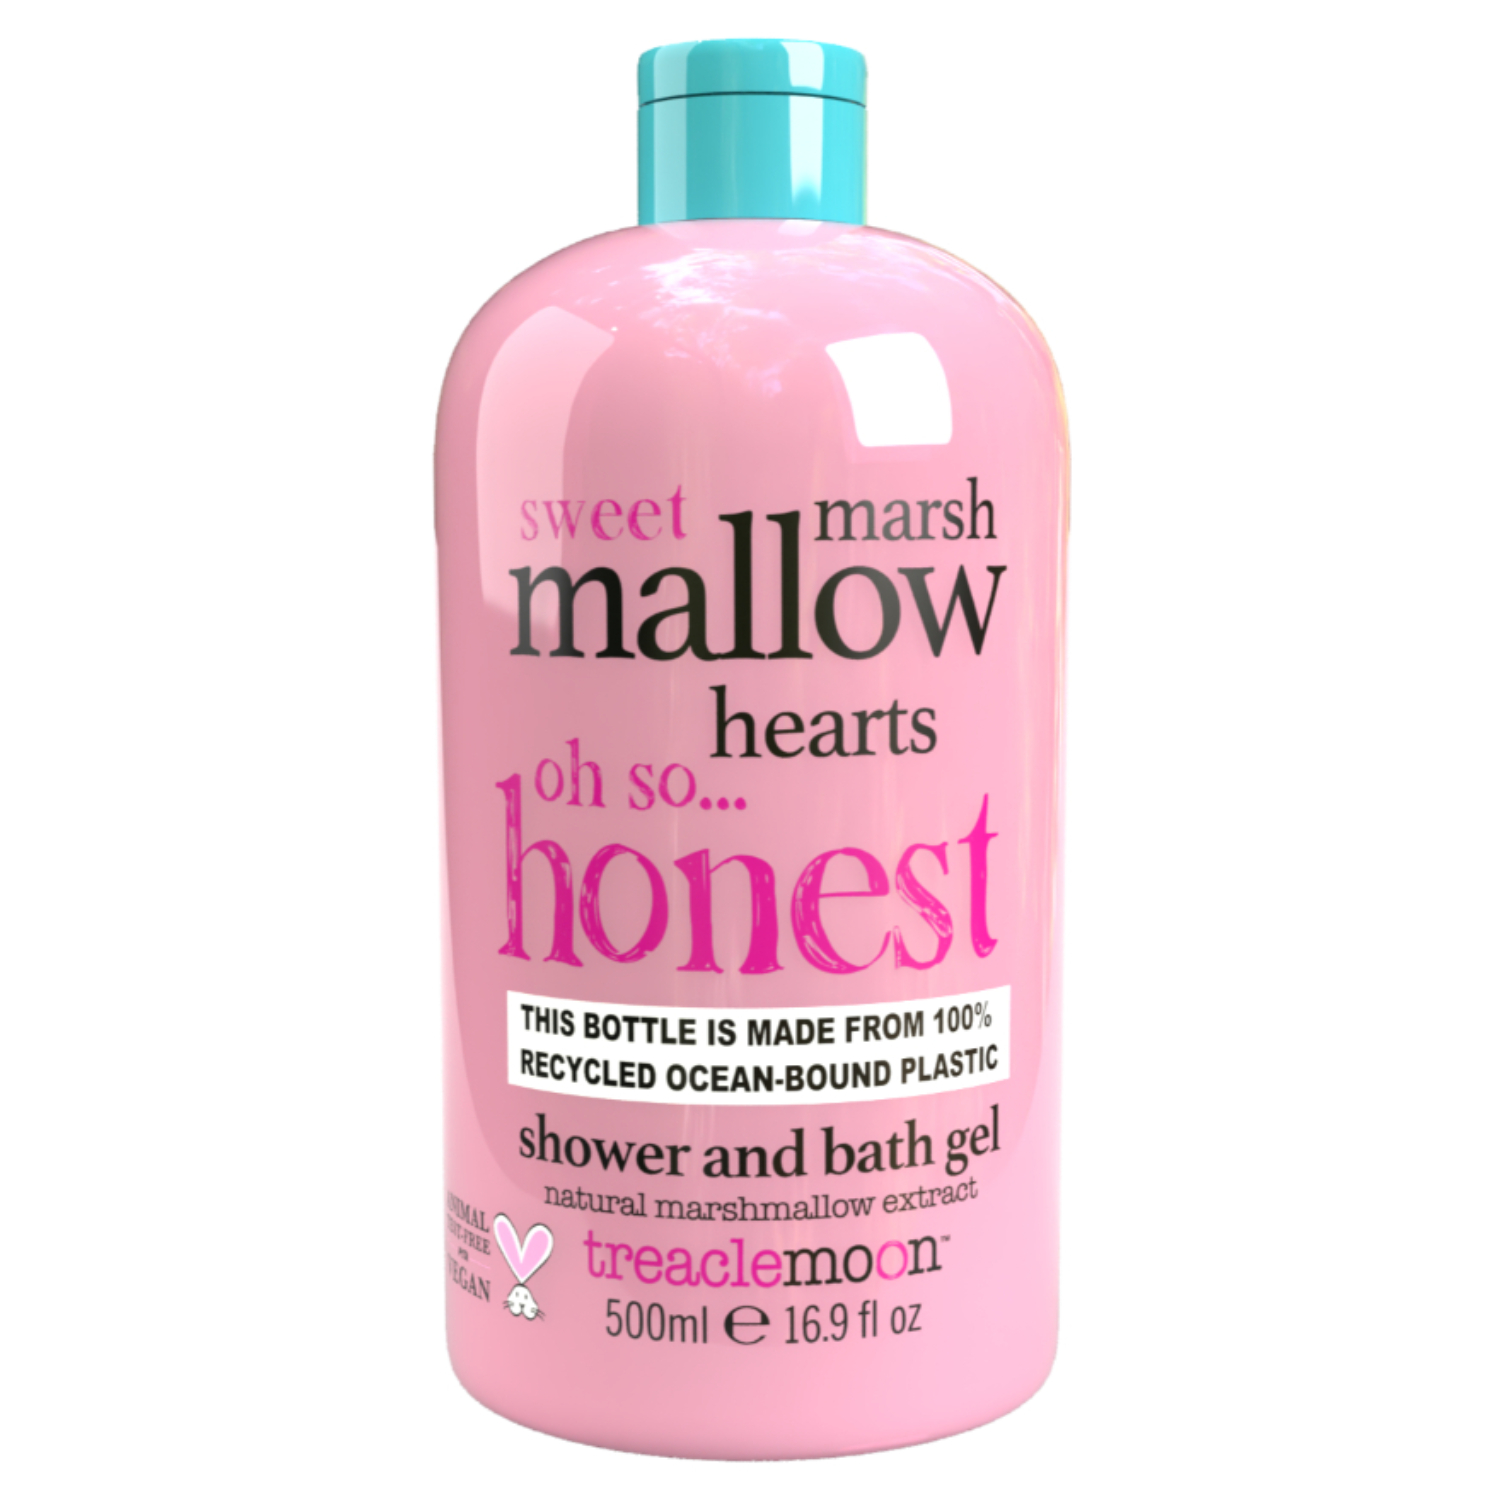 Product Image for Treacle Moon Mallow Hearts Shower Gel, 500 ml